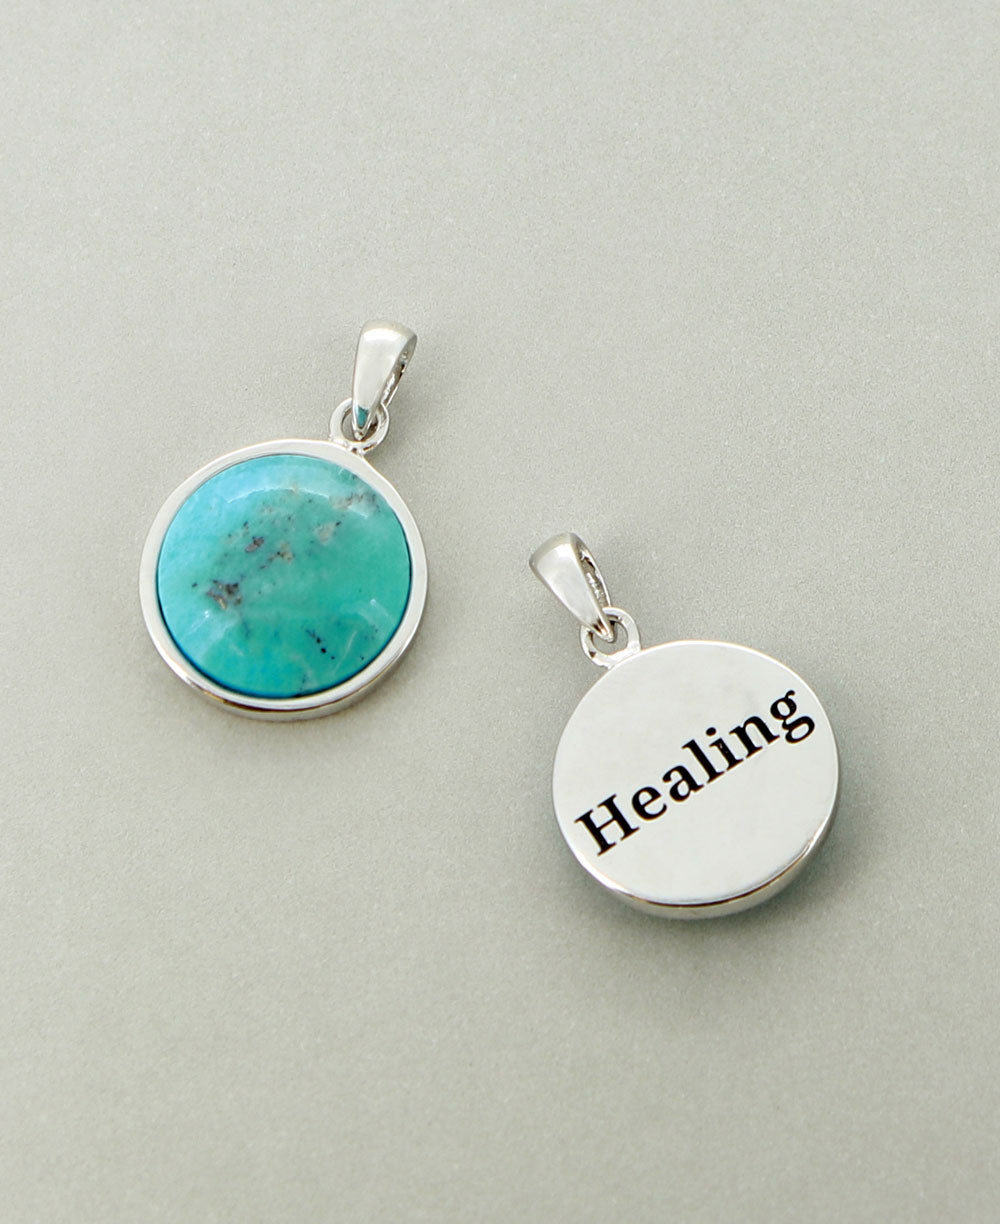 Healing Turquoise Sterling Silver Pendant - Charms & Pendants